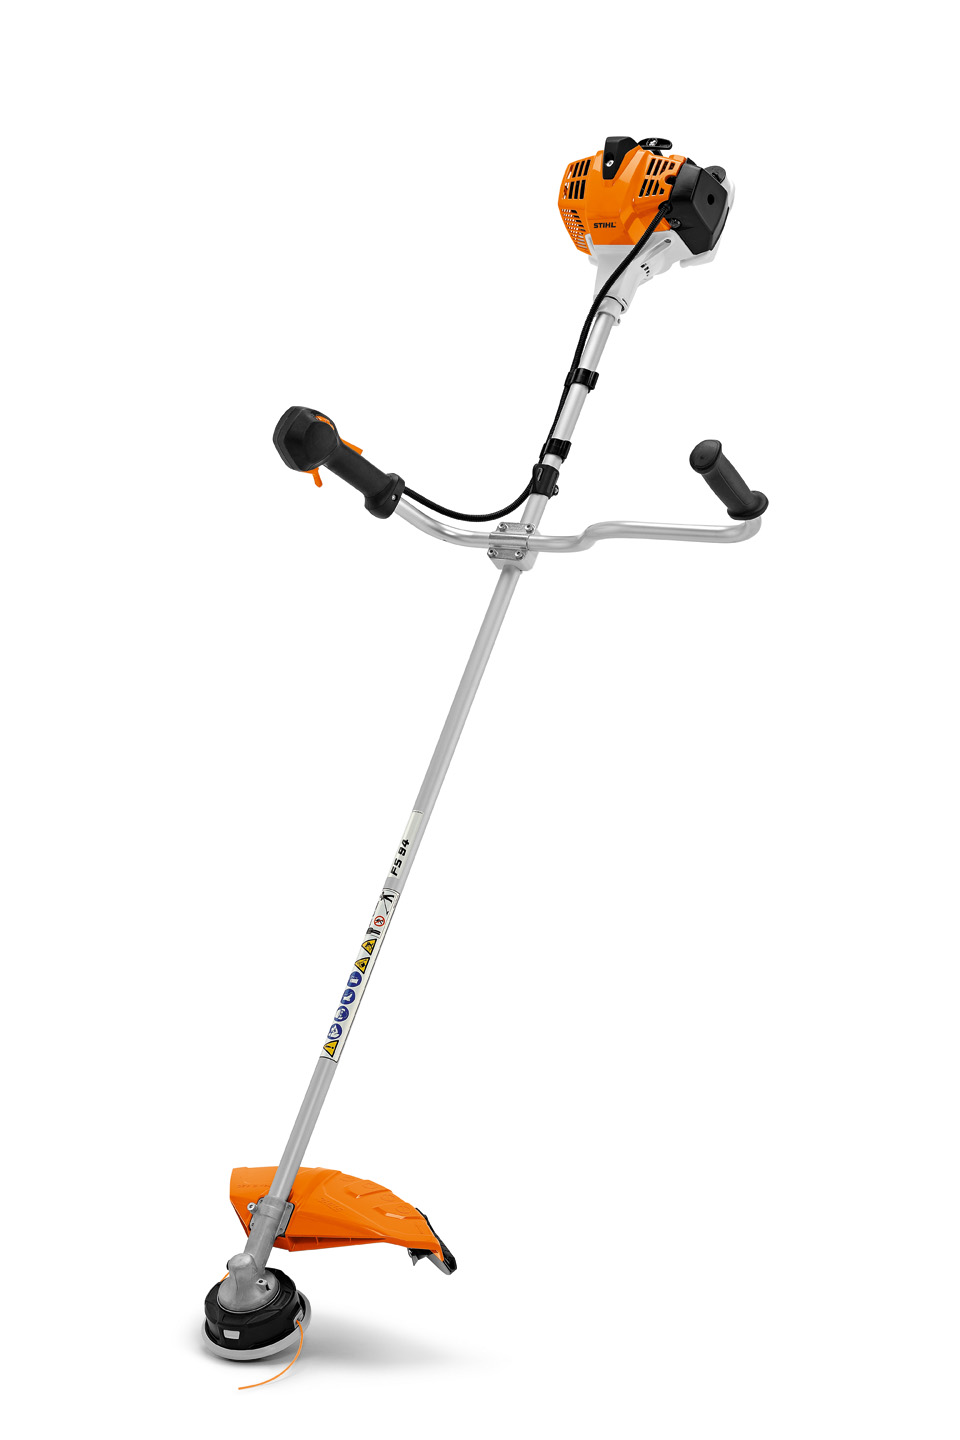 Stihl FS 94 C-E petrol brush-cutter with cow-horn handles